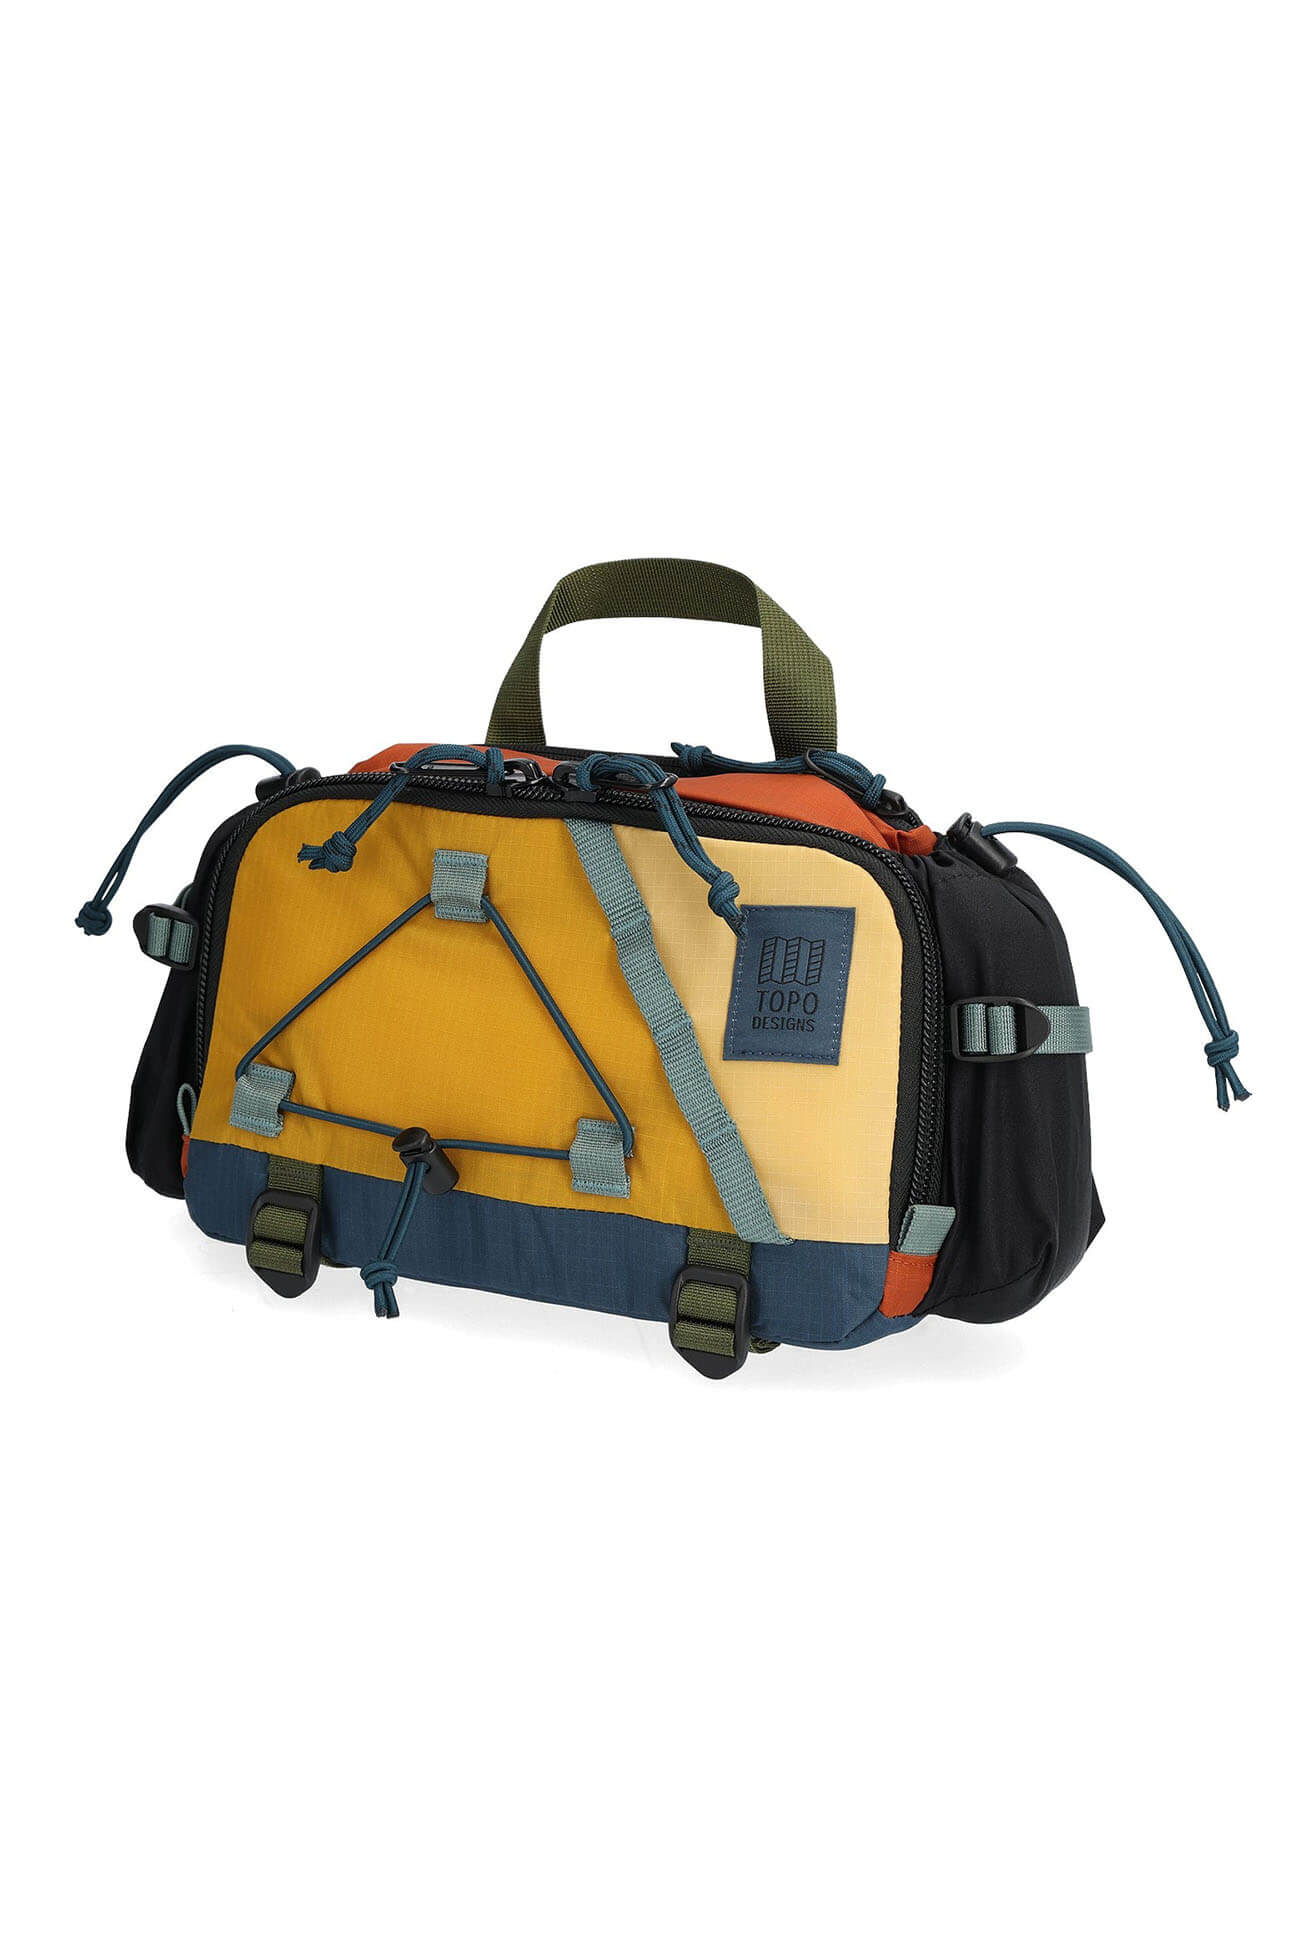 Topo Designs mountain hydro hip pack in mustard and clay